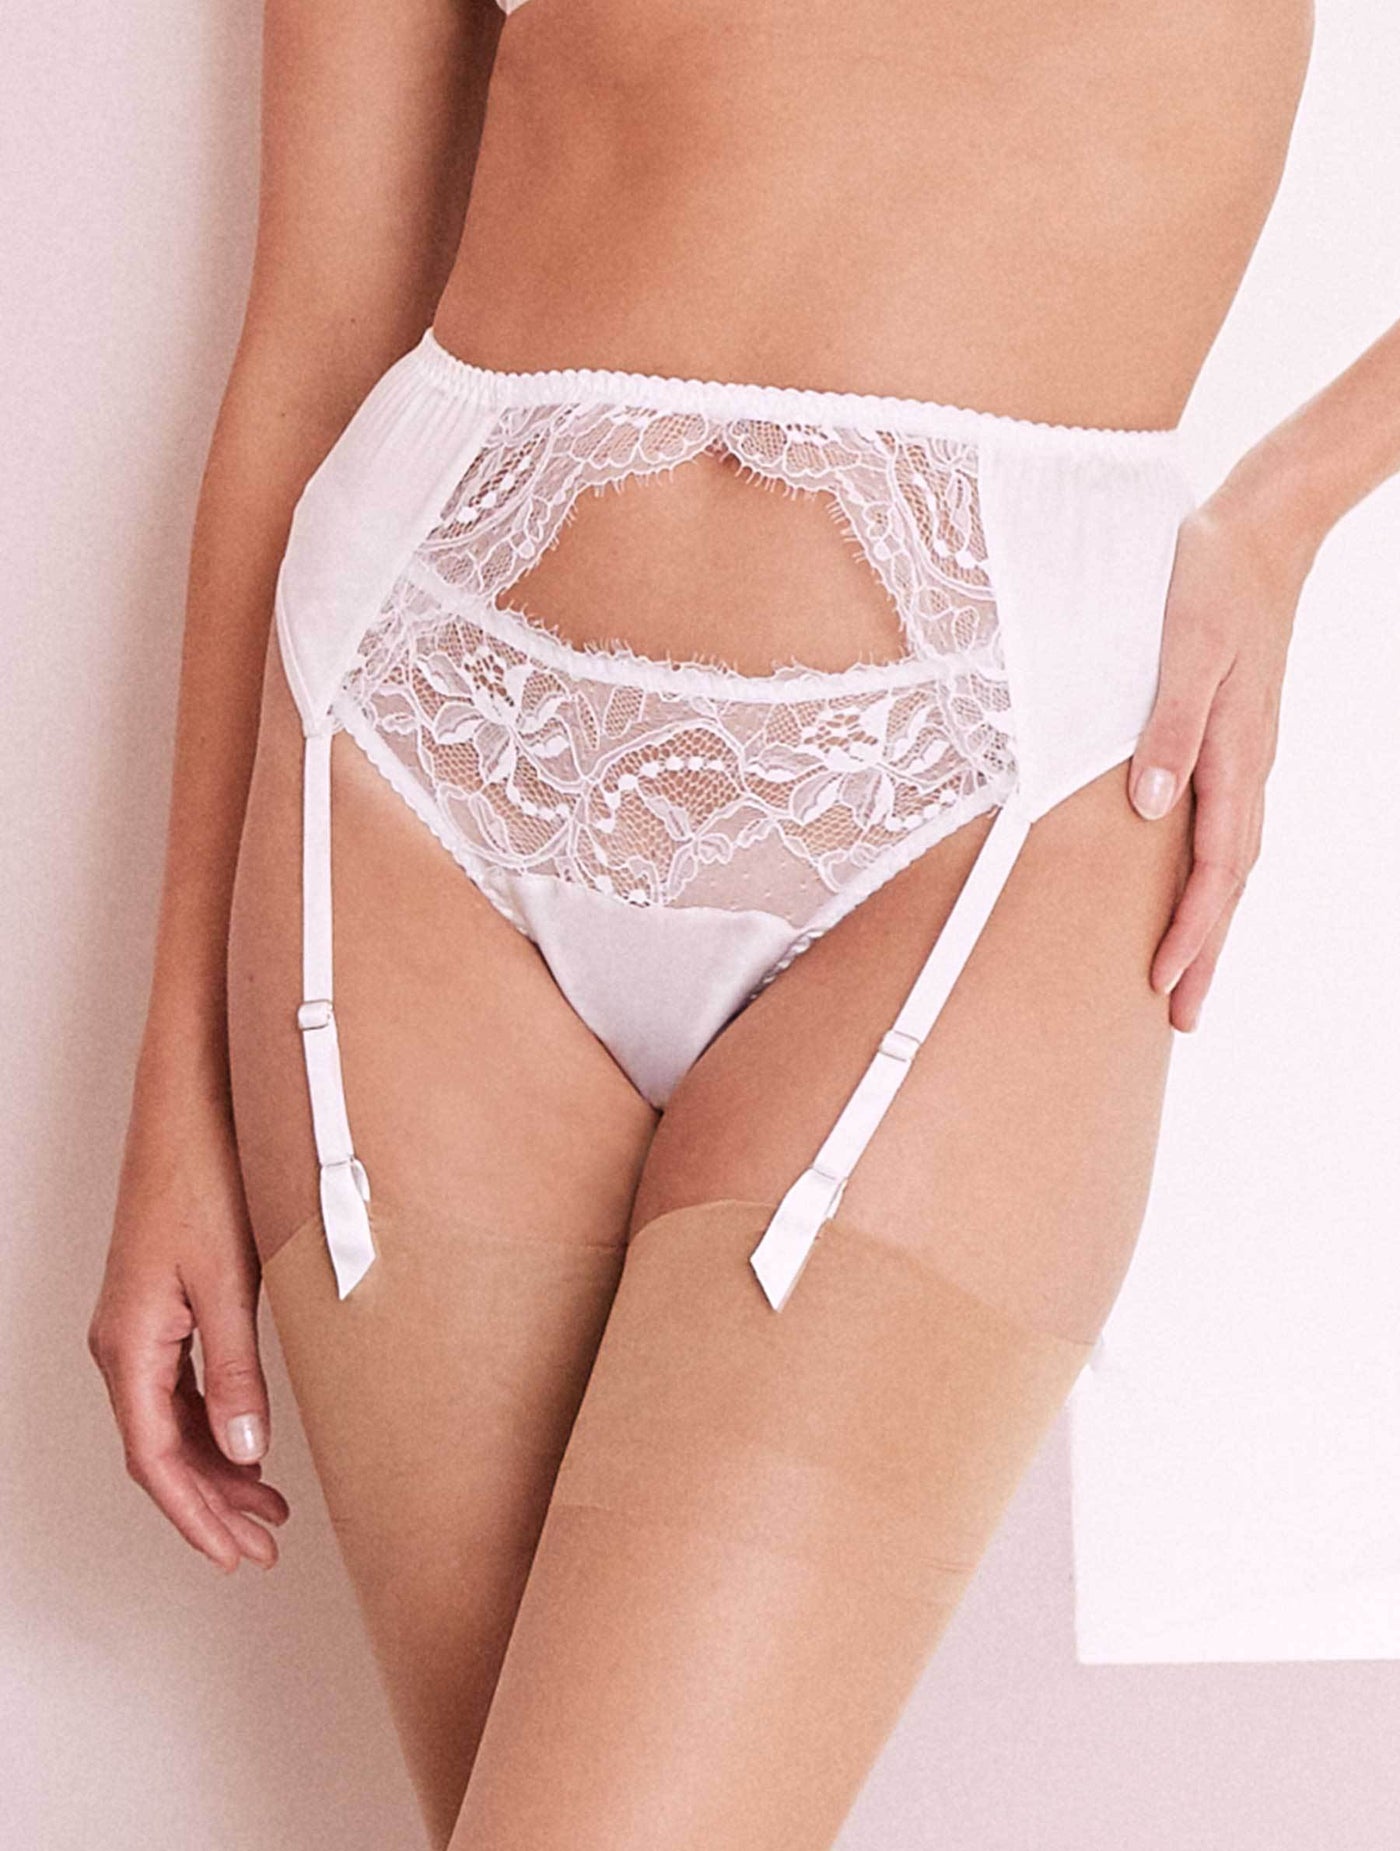 Signature Suspender Belt and Thong - White lace